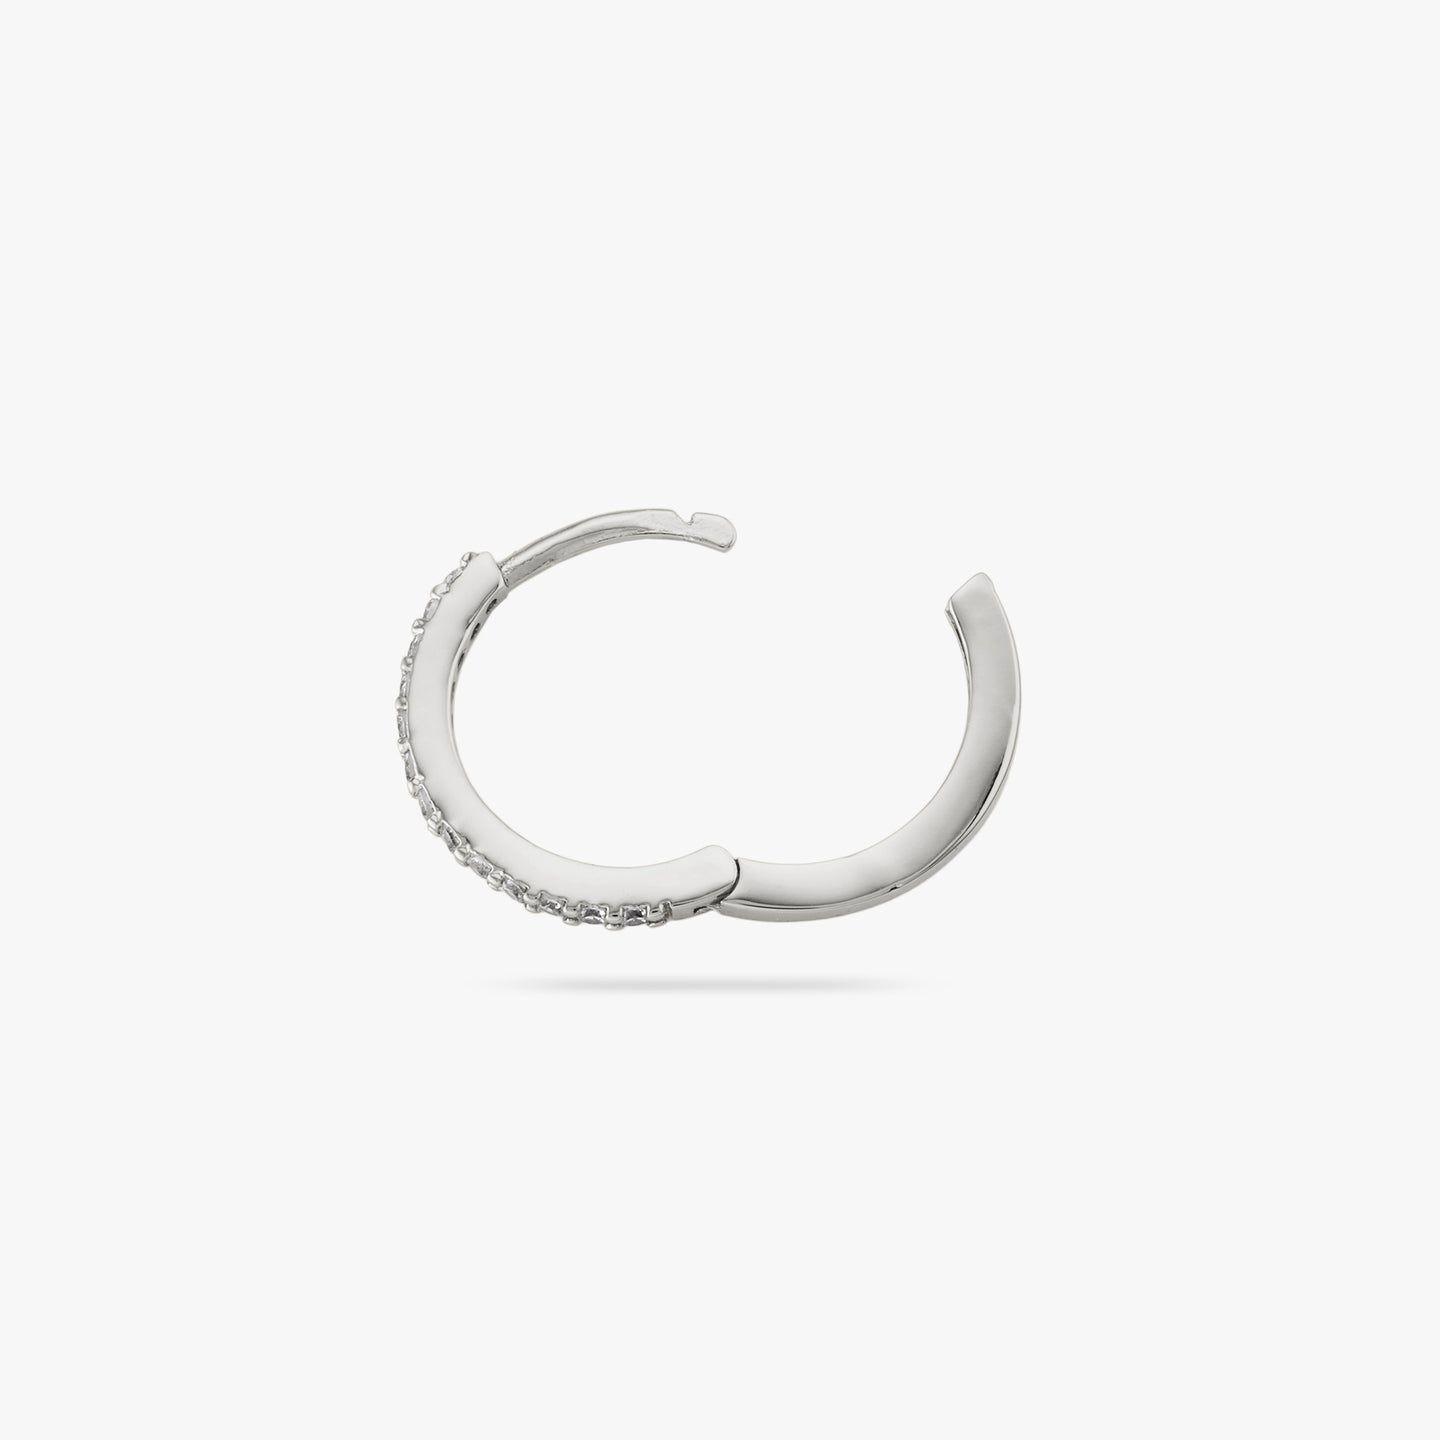 This is a small silver hoop with clear cz gems along the front and the clasp undone color:null|silver/clear